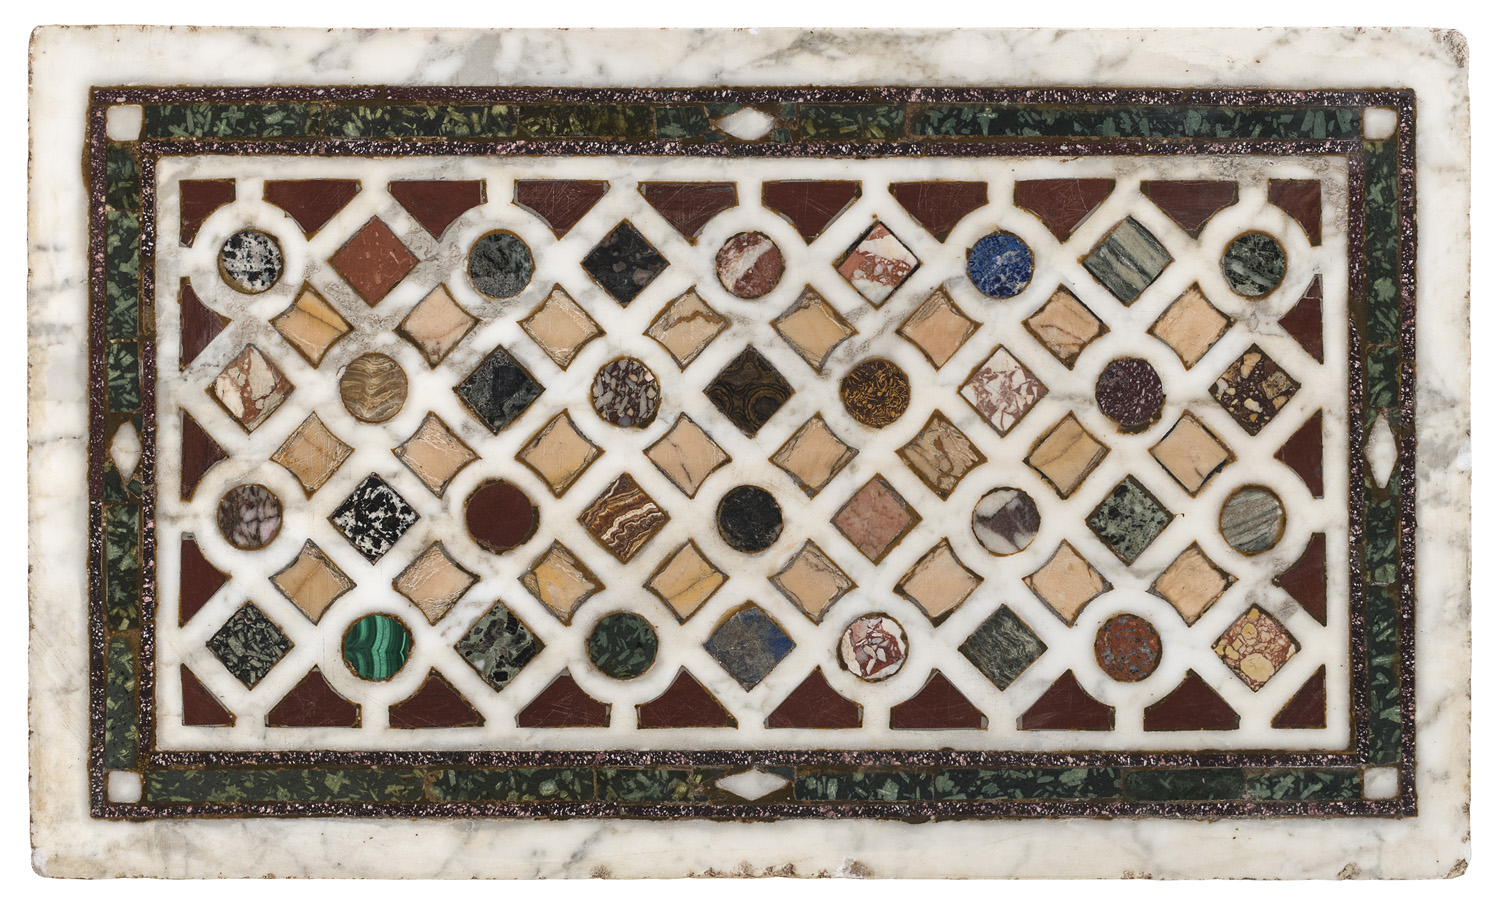 TABLE TOP OF INLAID MARBLES PROBABLY ROMAN MANUFACTURE 19th CENTURY